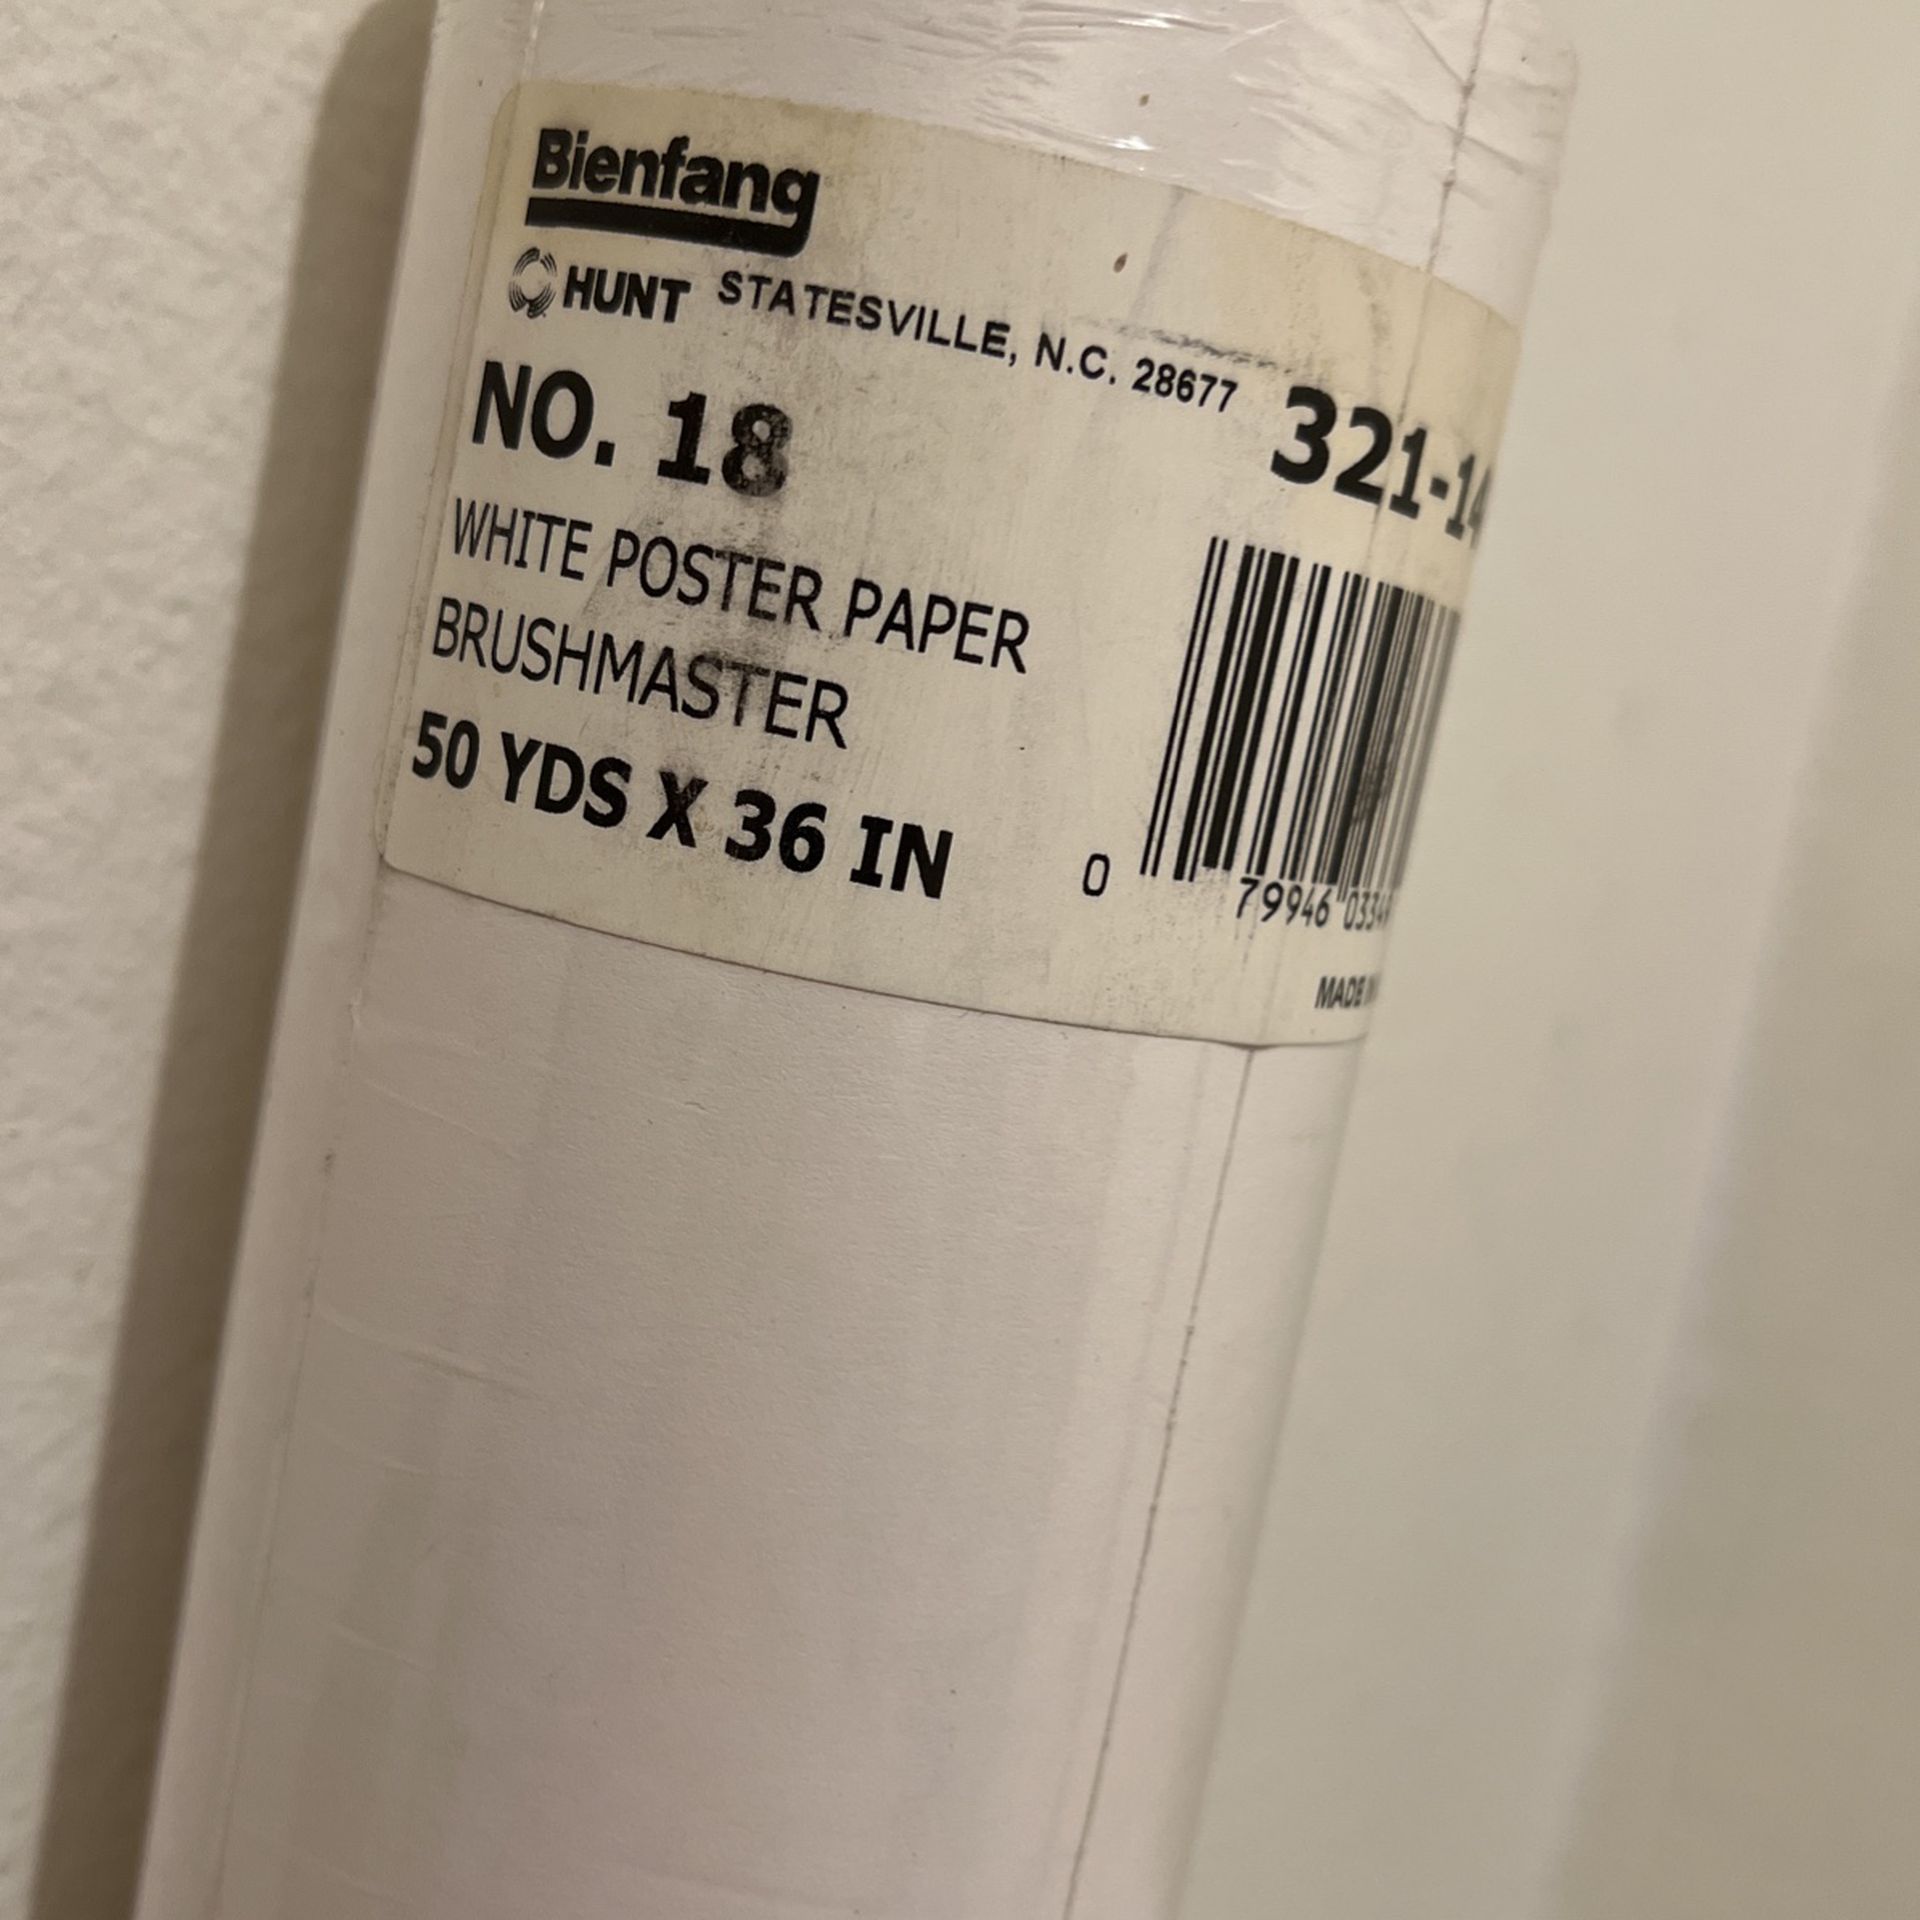 Paper (white Poster Paper)